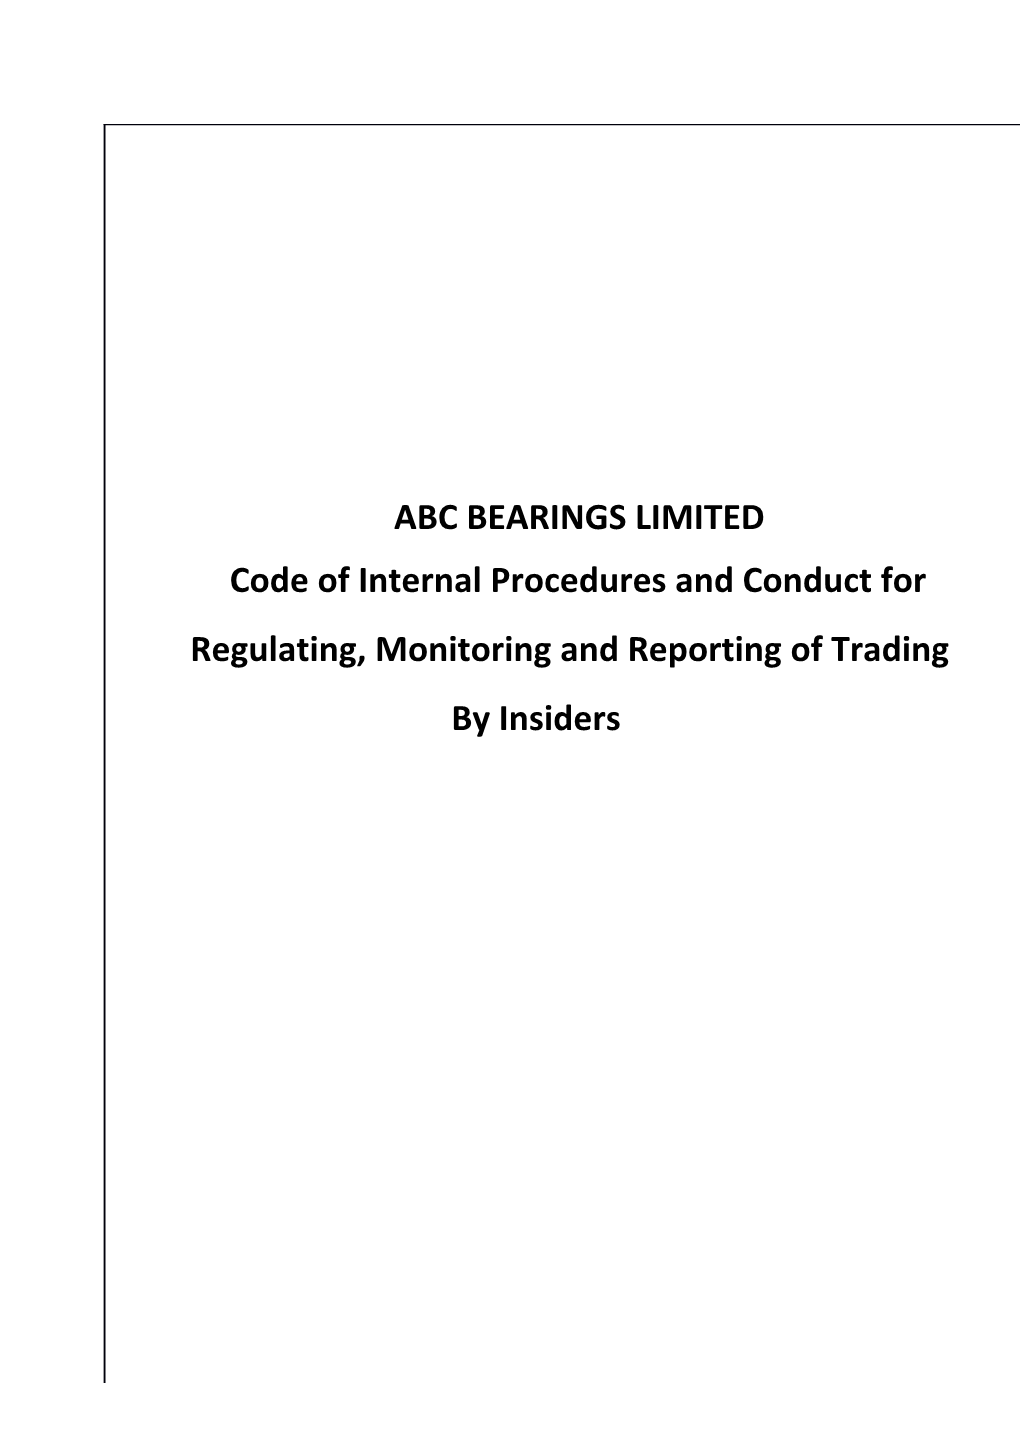 Code of Internal Procedures and Conduct for Regulating, Monitoring And